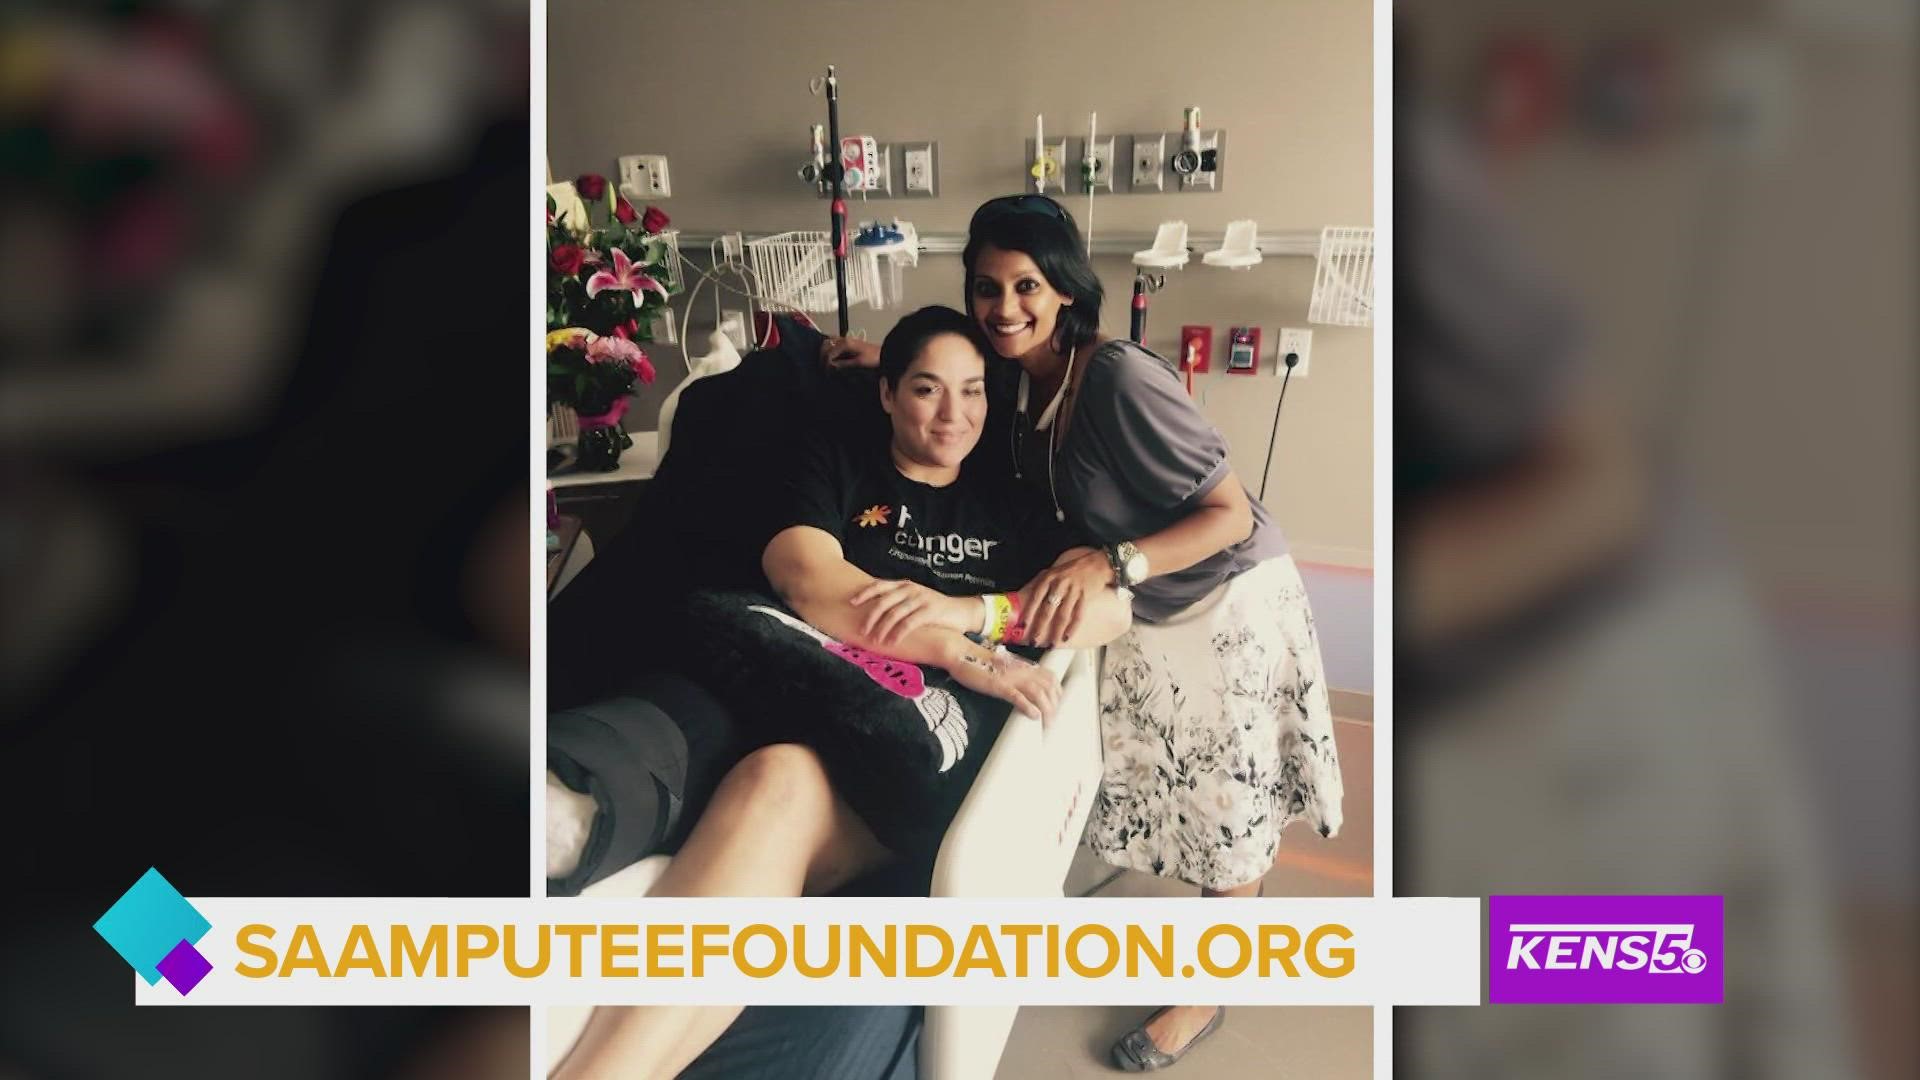 Mona Patel, founder of San Antonio Amputee Foundation, offers support to limb loss survivors in our community